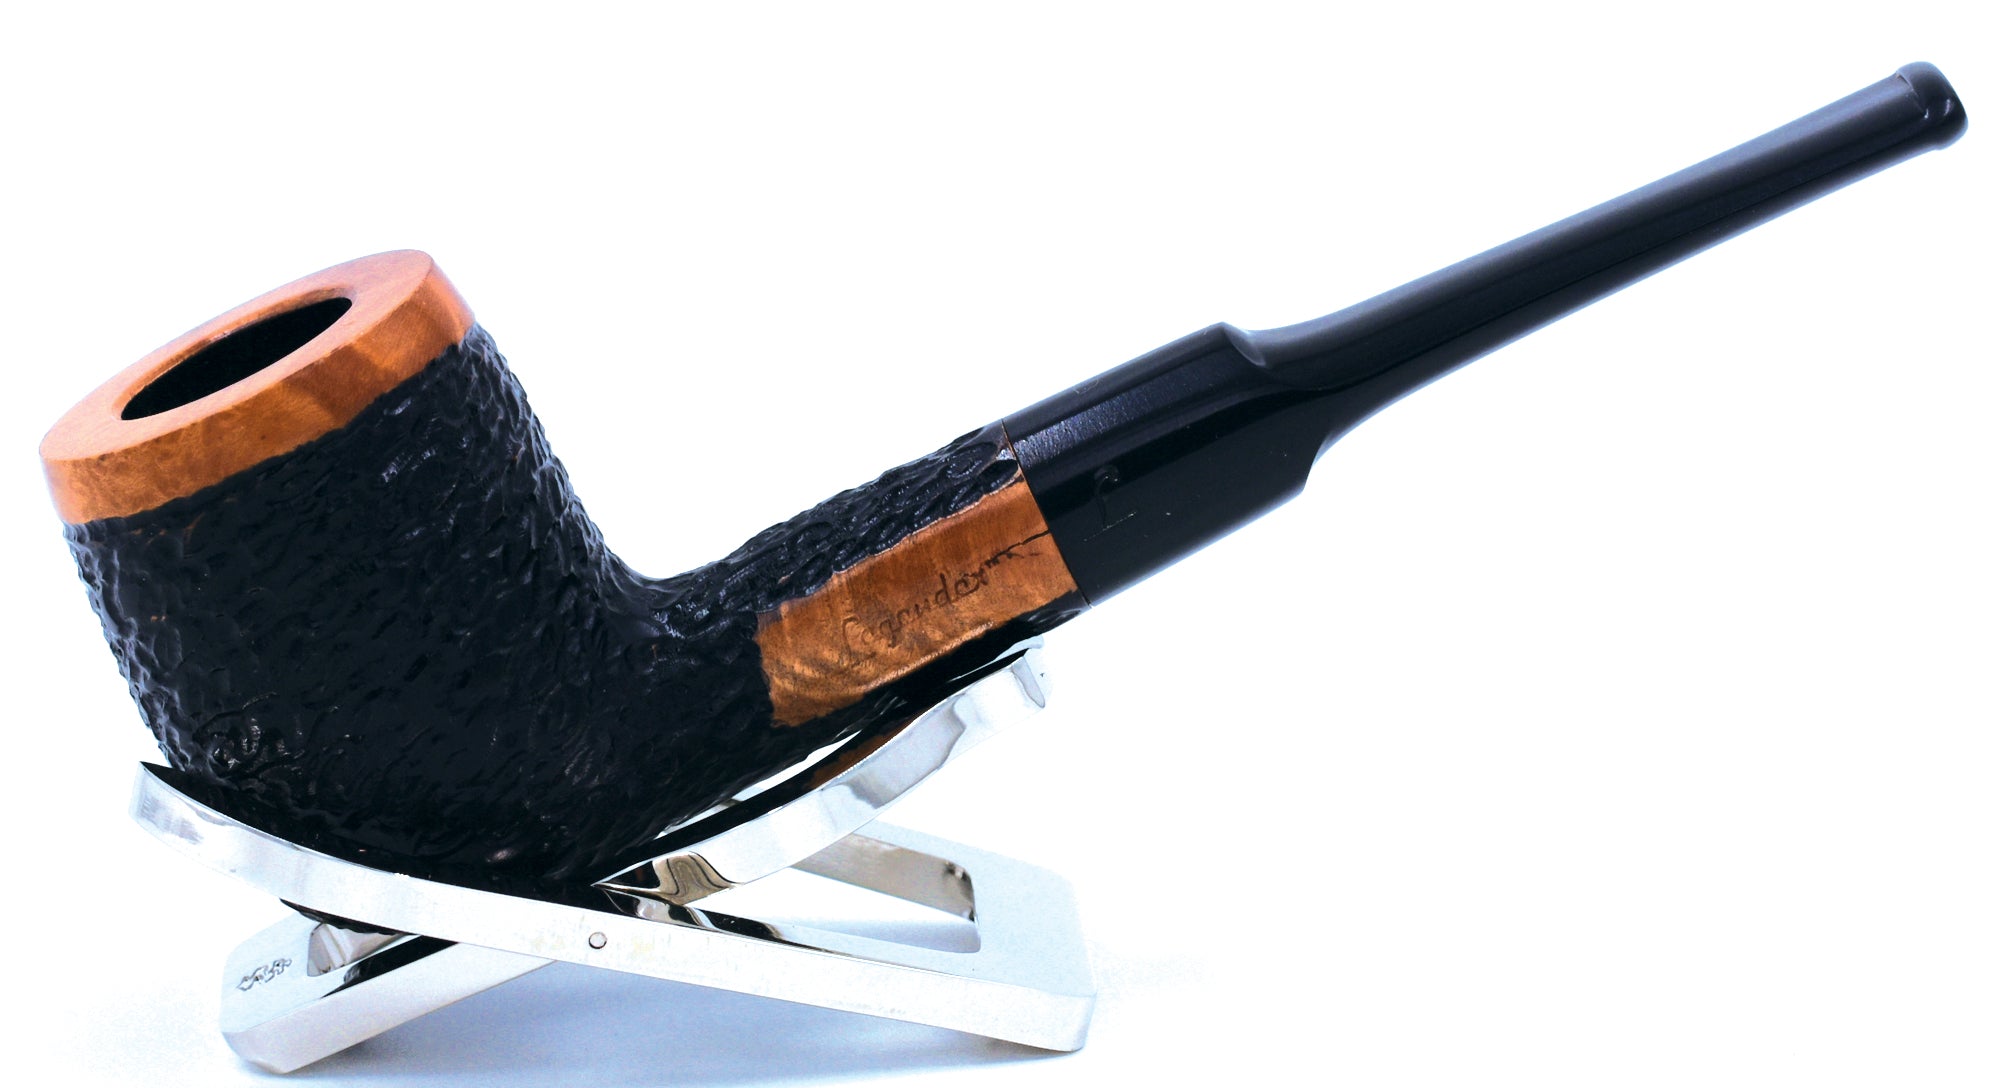 LEGENDEX® TOSCANINI* 9 MM Filtered Briar Smoking Pipe Made In Italy 01-08-412